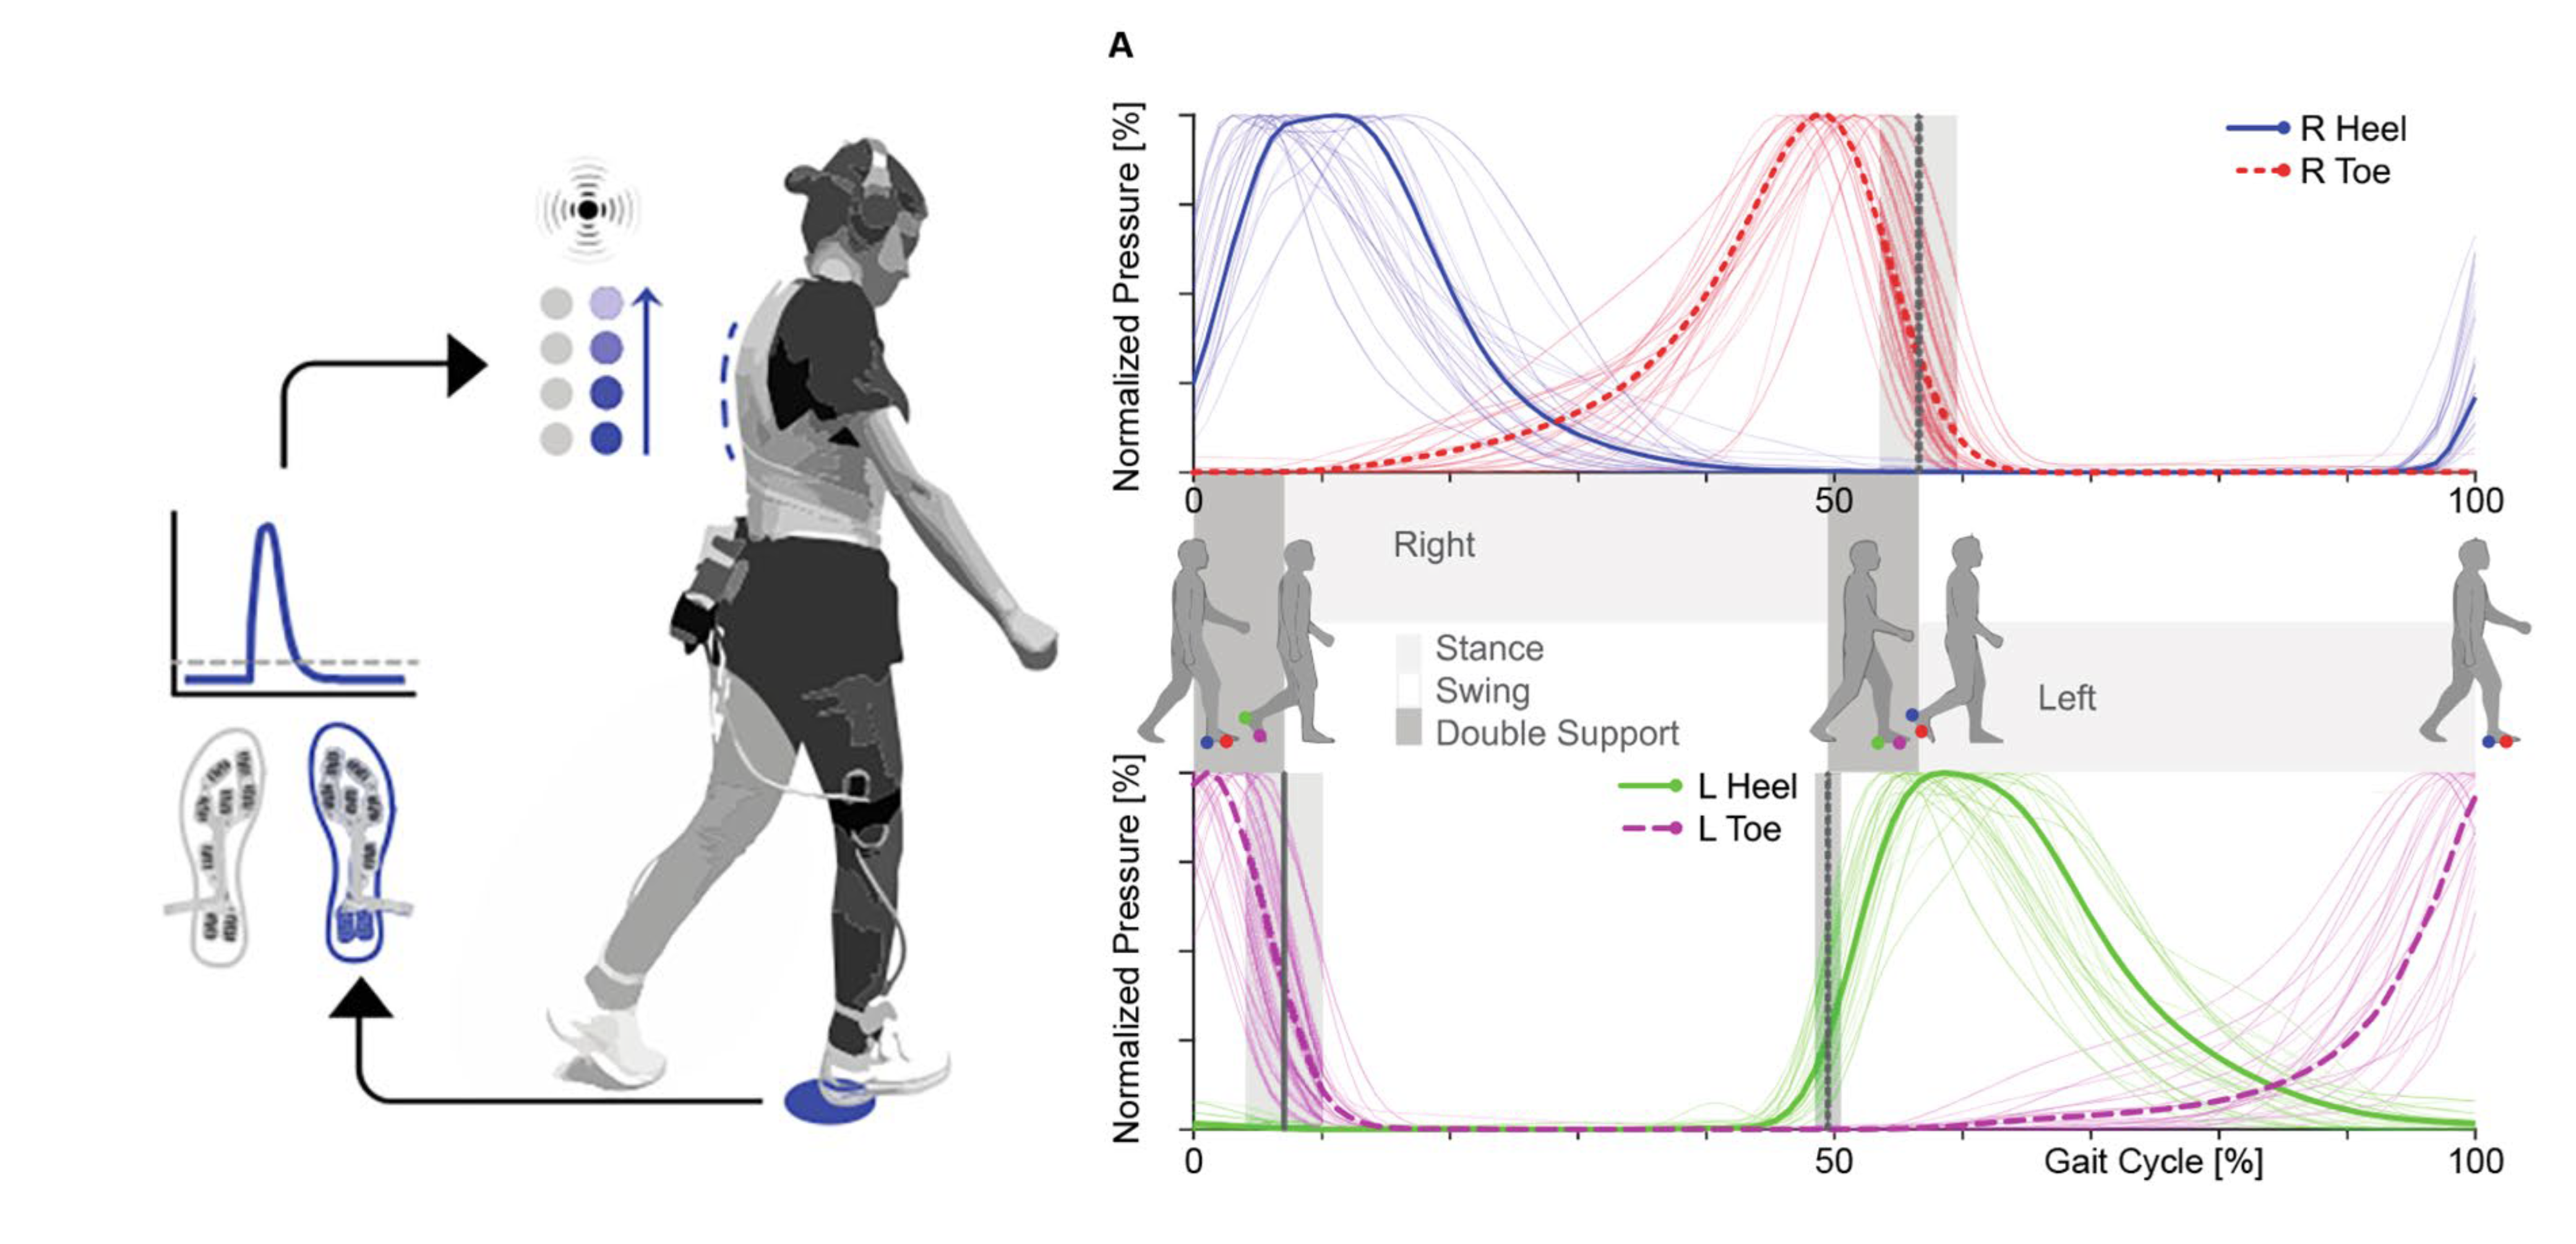 Image of the FeetBack study setup and spatiotemporal gait parameters